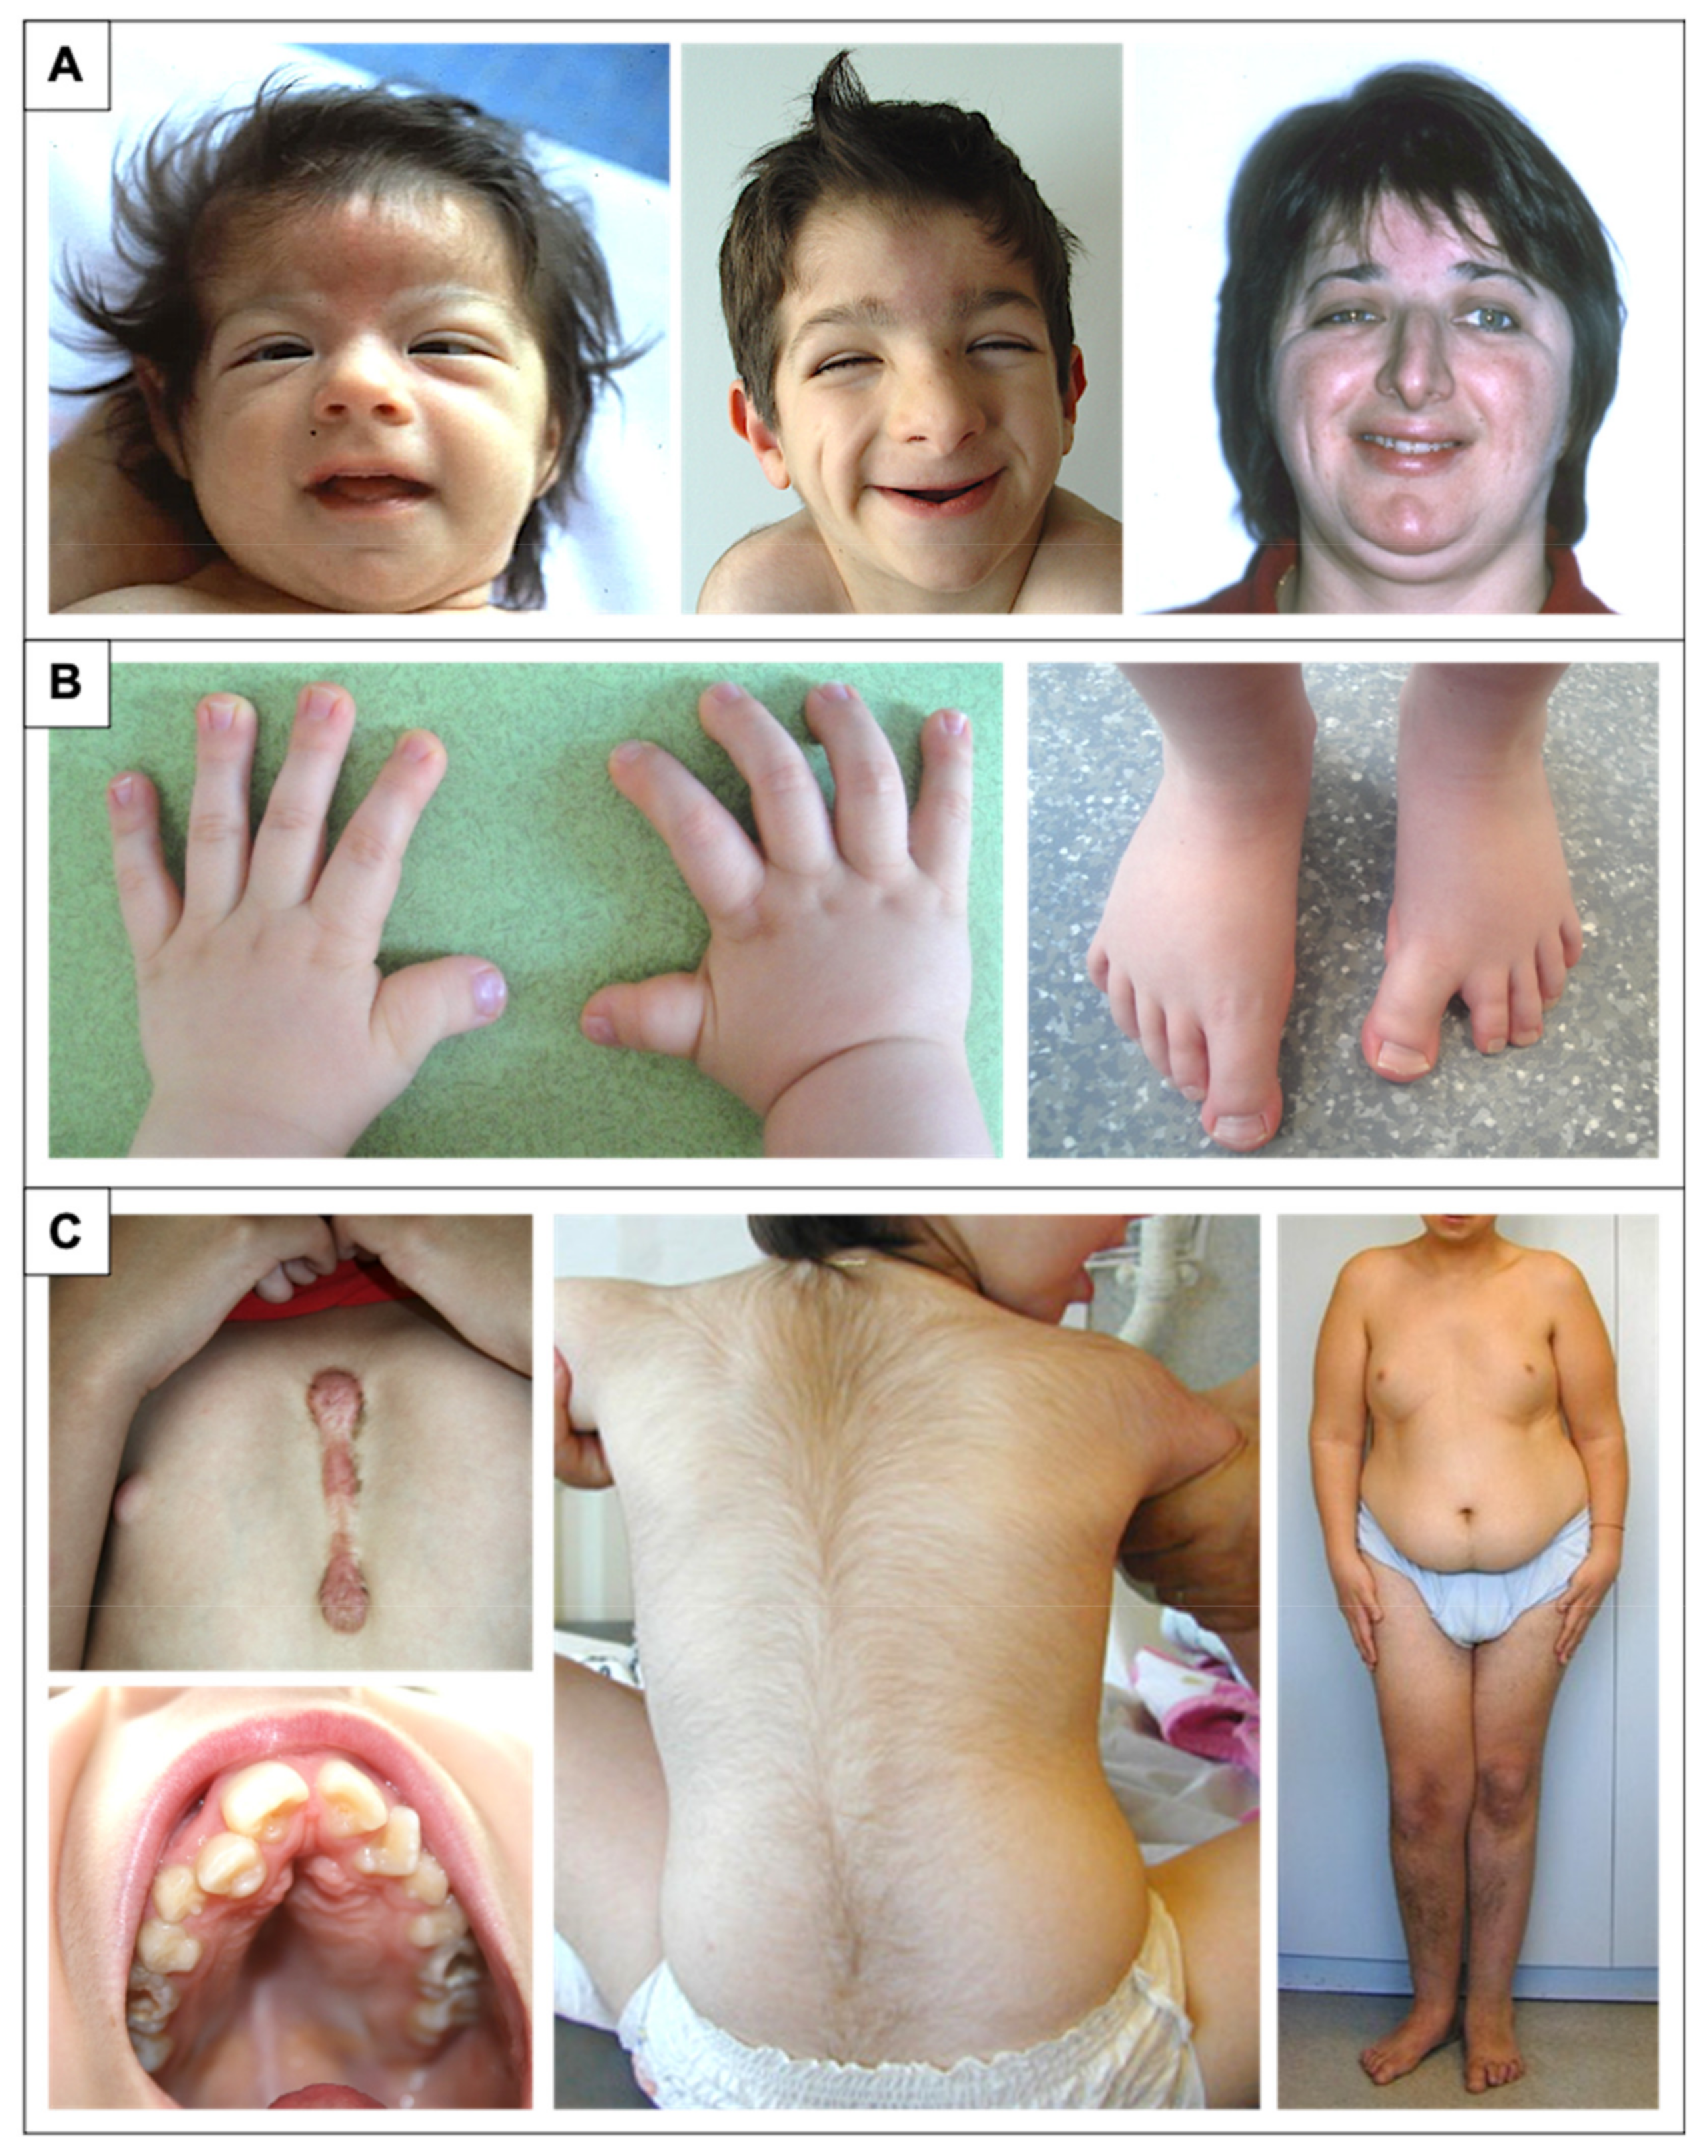 The Rubinstein-Taybi syndrome: a report of two cases.